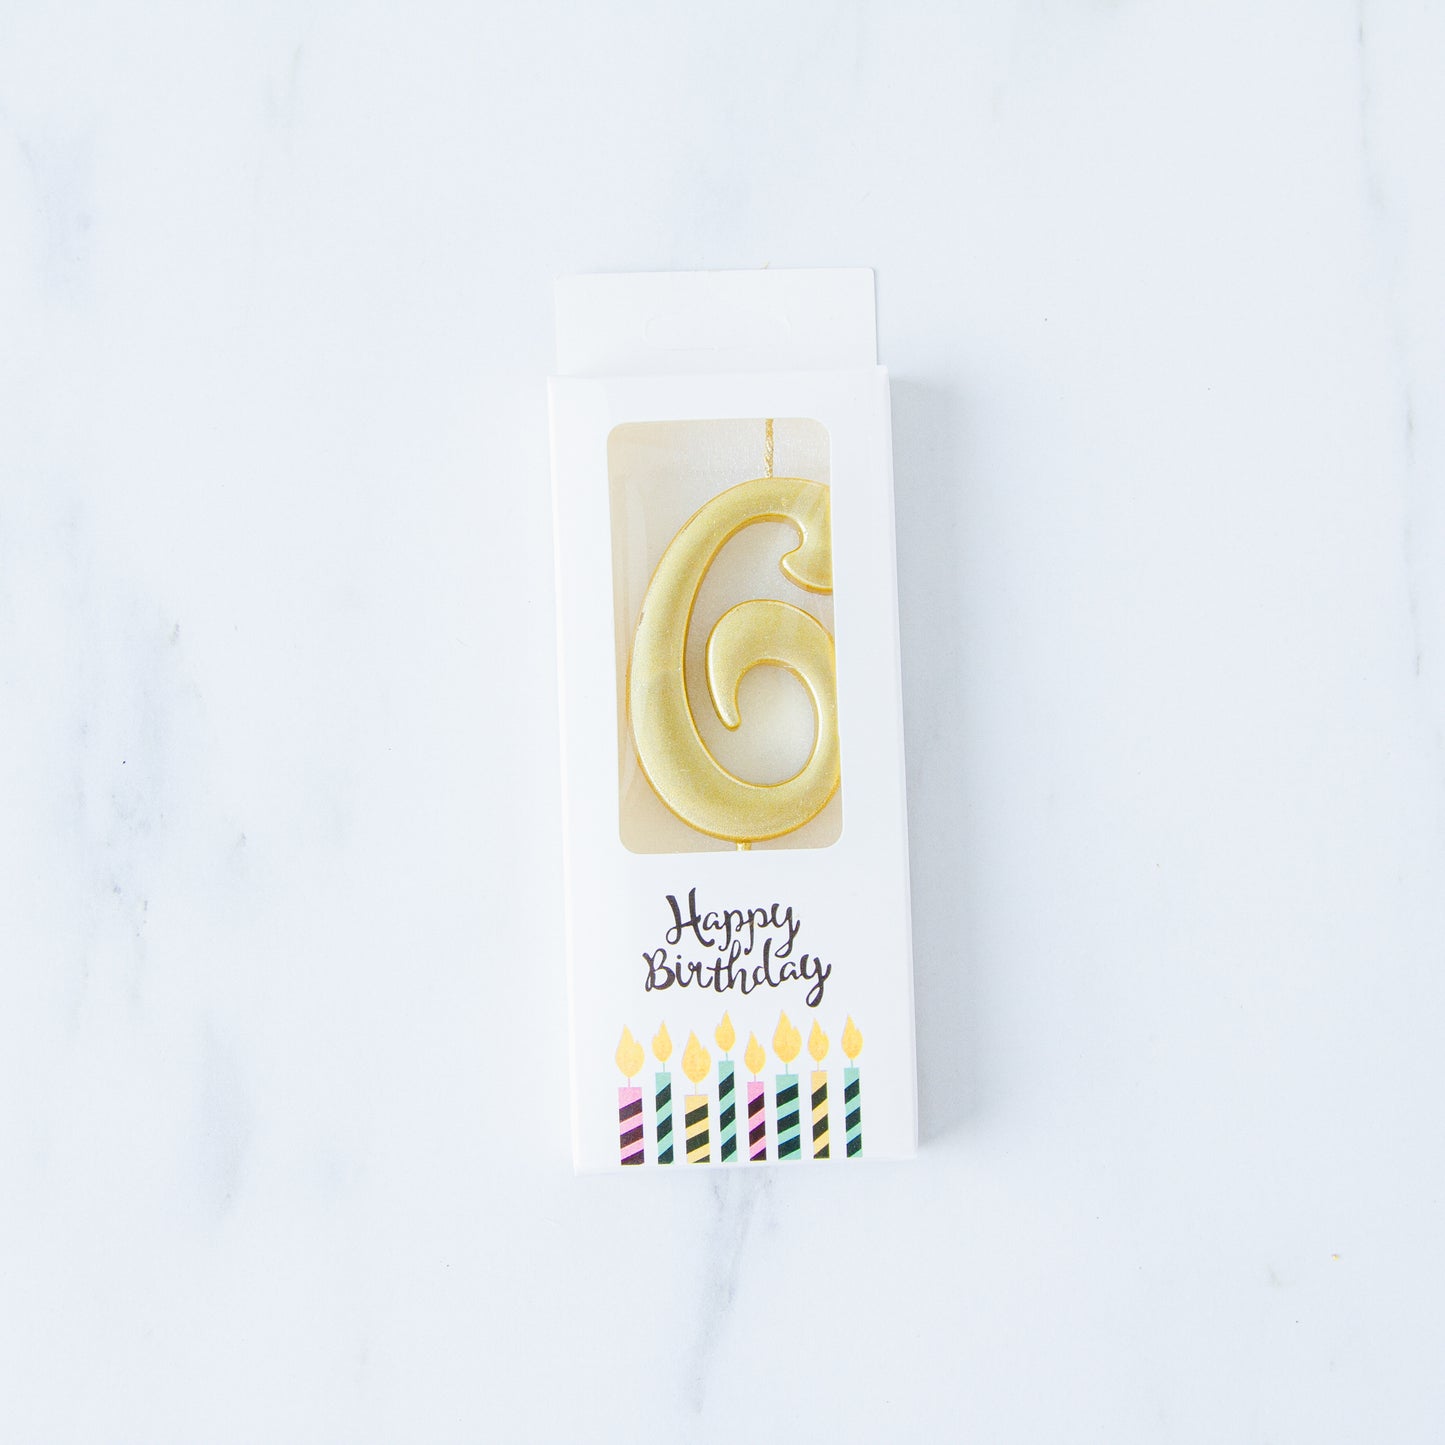 Gold Number Candle | $3.20/pc